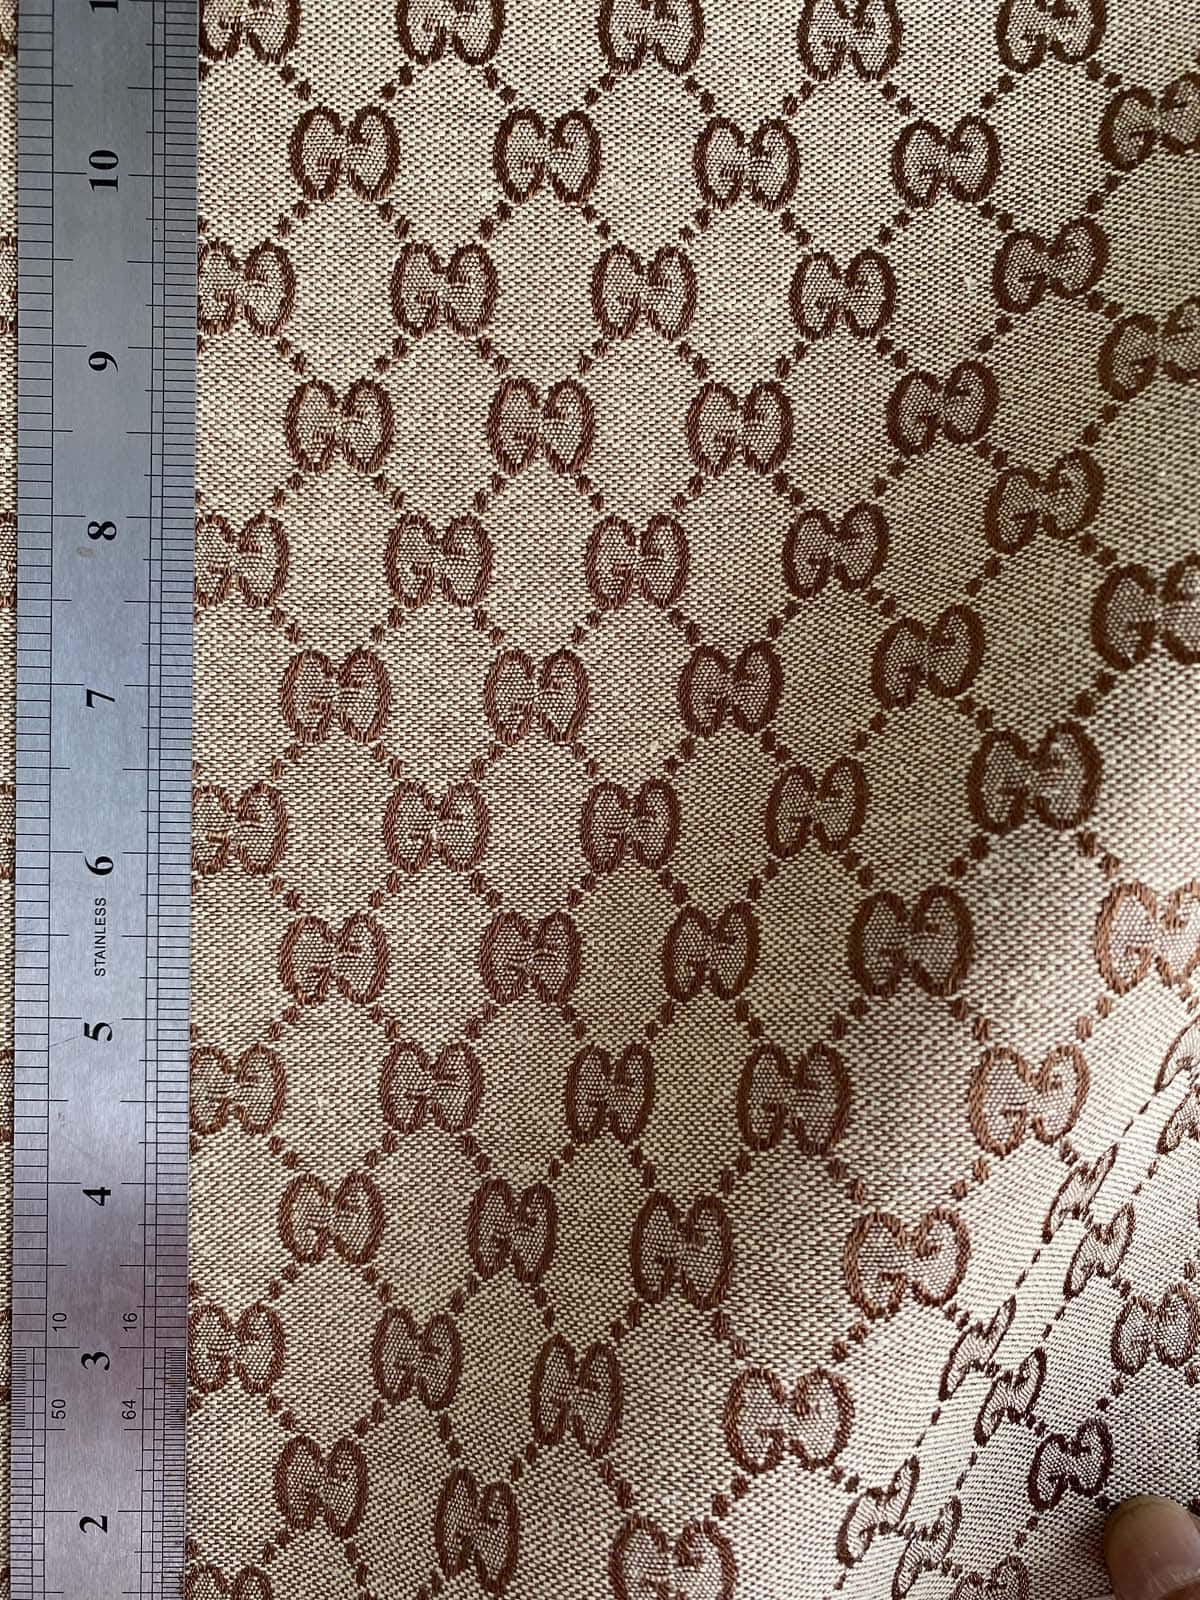 Gucci Canvas Fabric BROWN | Gucci Jacquard Fabric for sale | wouwww